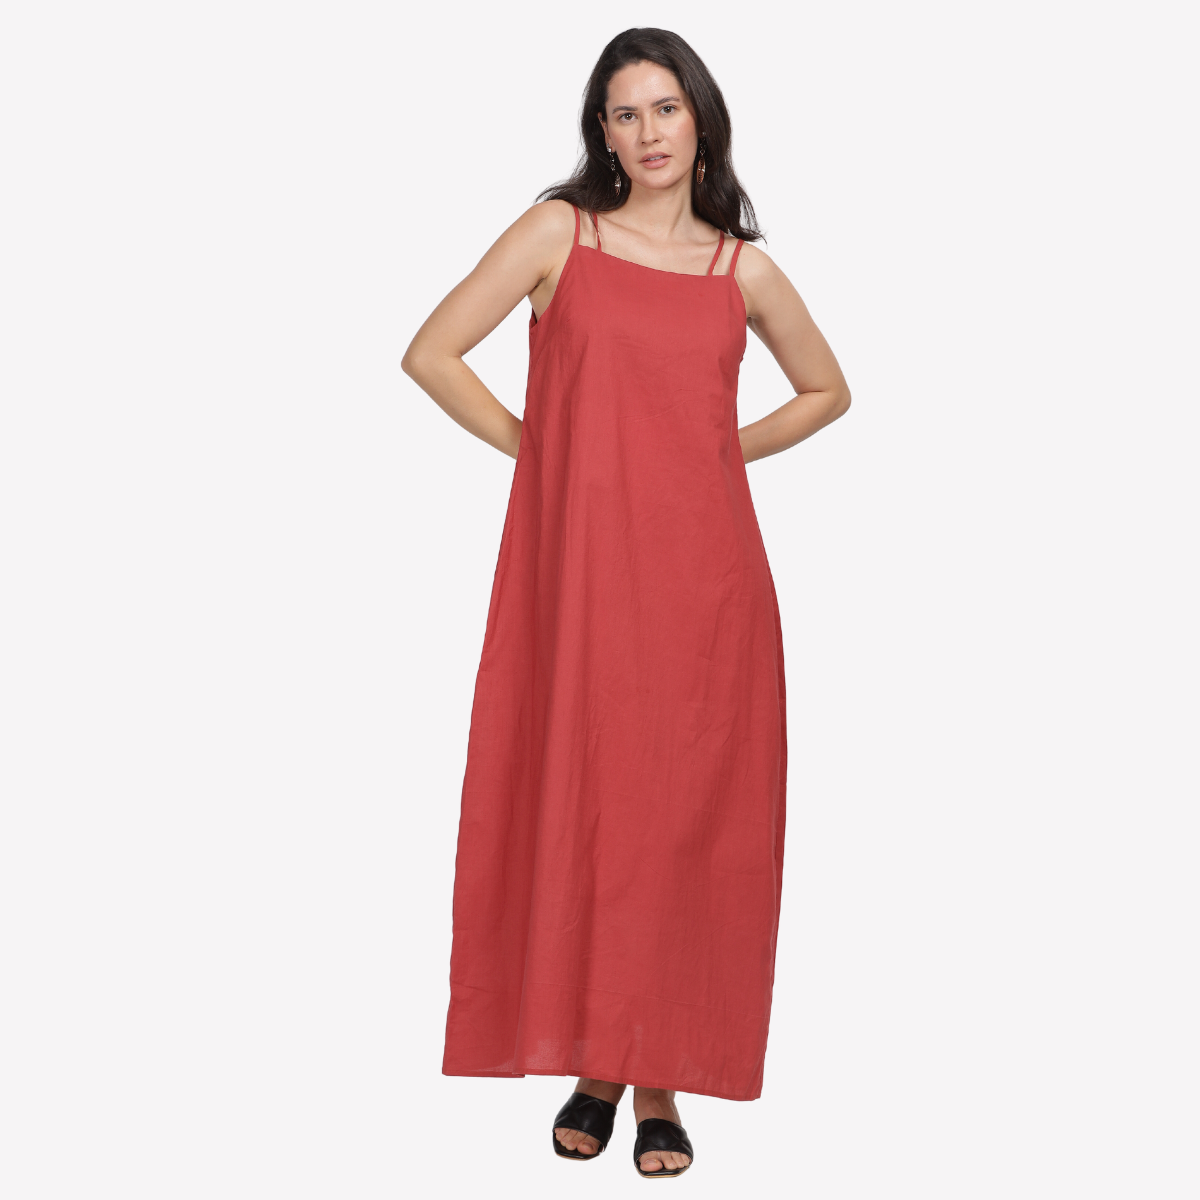 Shop Now Chiquita Sleeveless Natural Dyed Maxi Dress | Reepeat